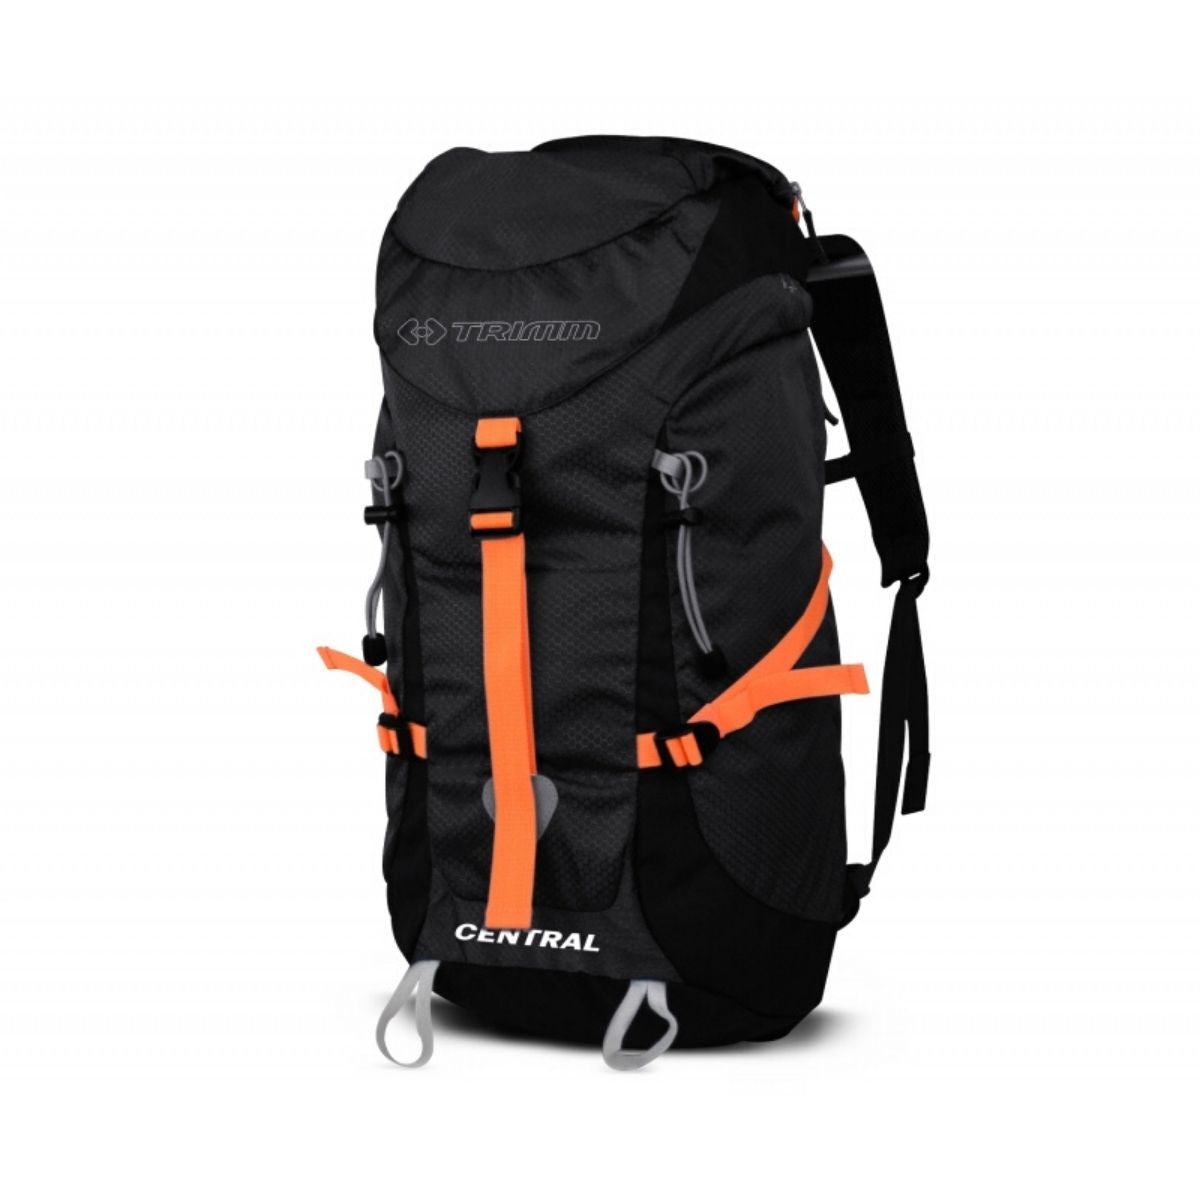 Trimm: Central 40L Backpack (Black) - Outdoor Travel Gear 1